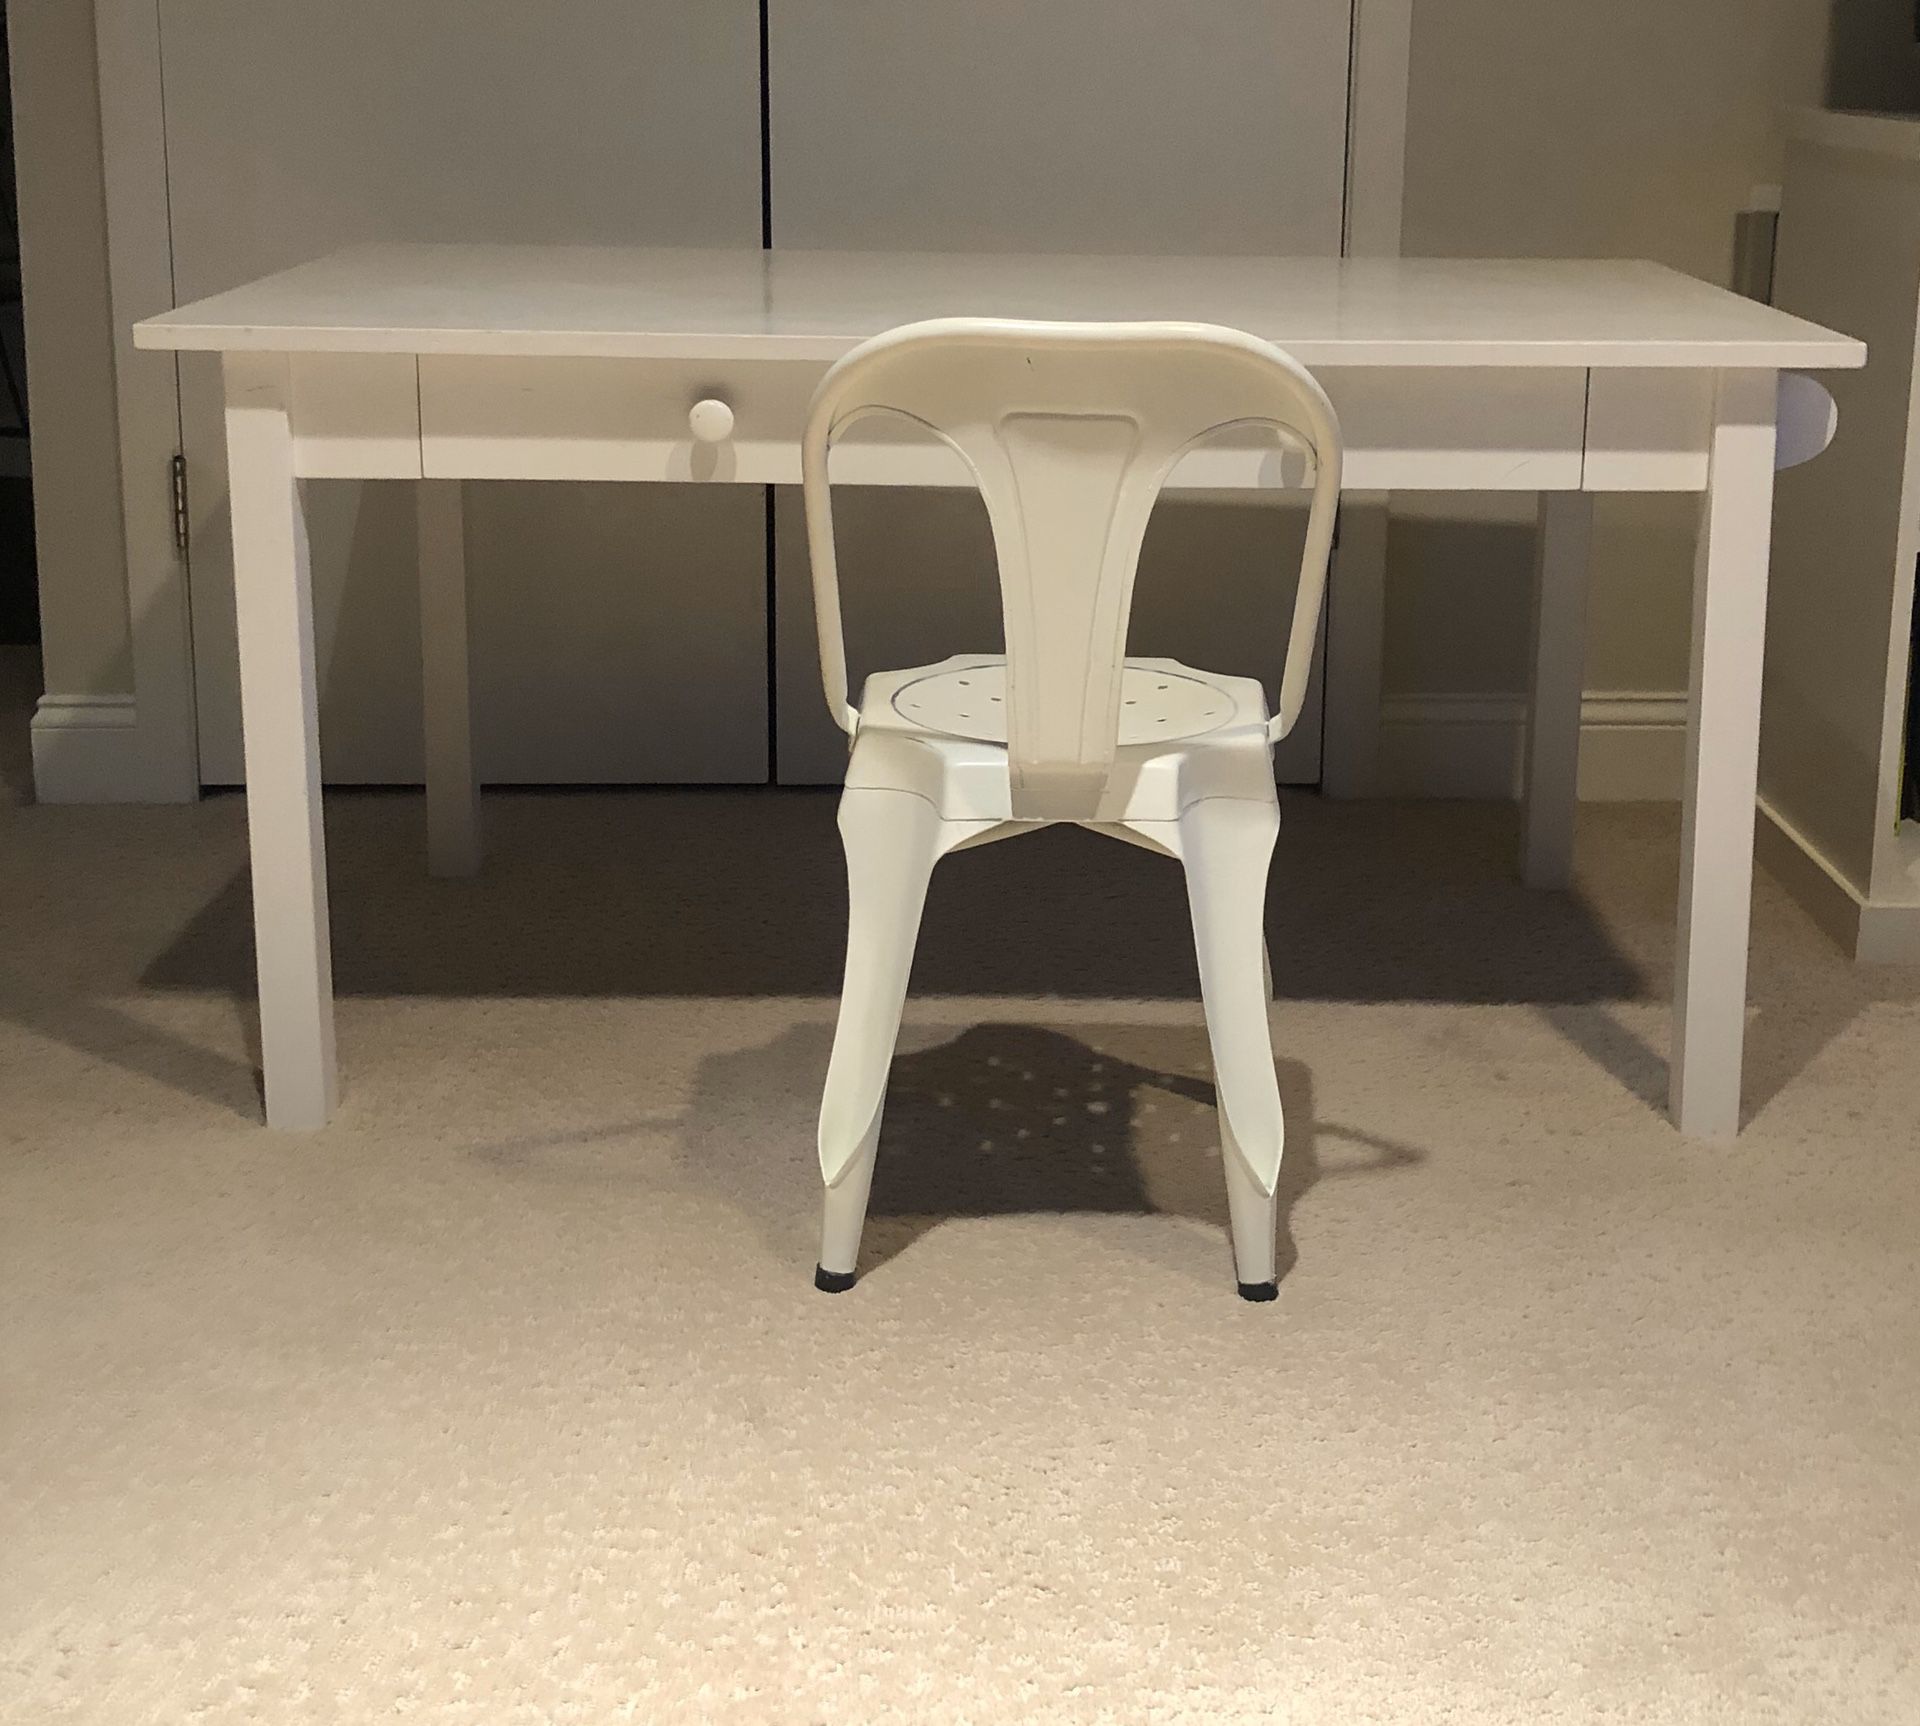 Pottery Barn kids activity table / desk and chair